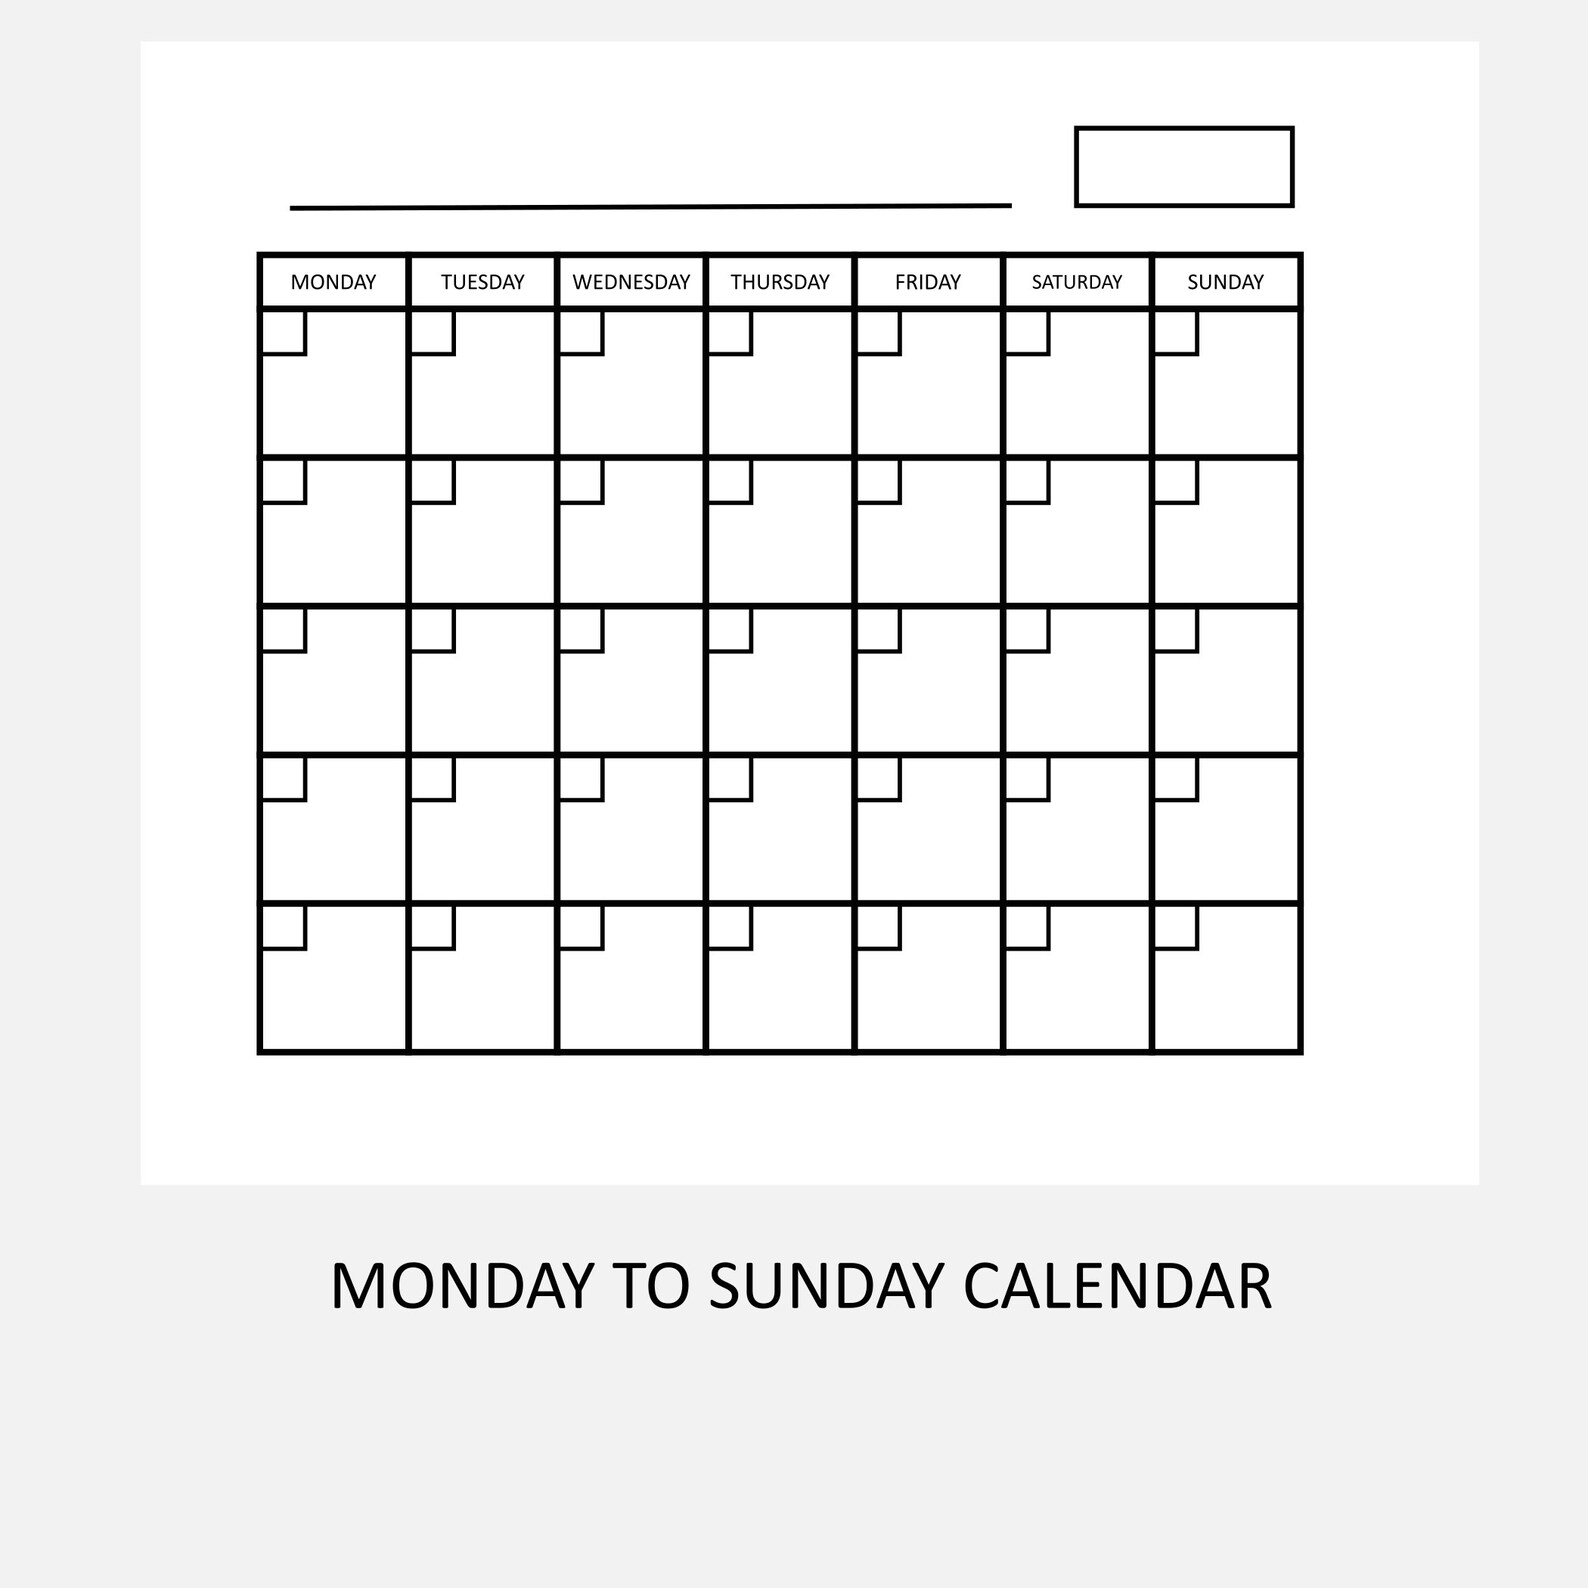 8 5 X 11 Inch Blank Calendar Page Template Instant 2